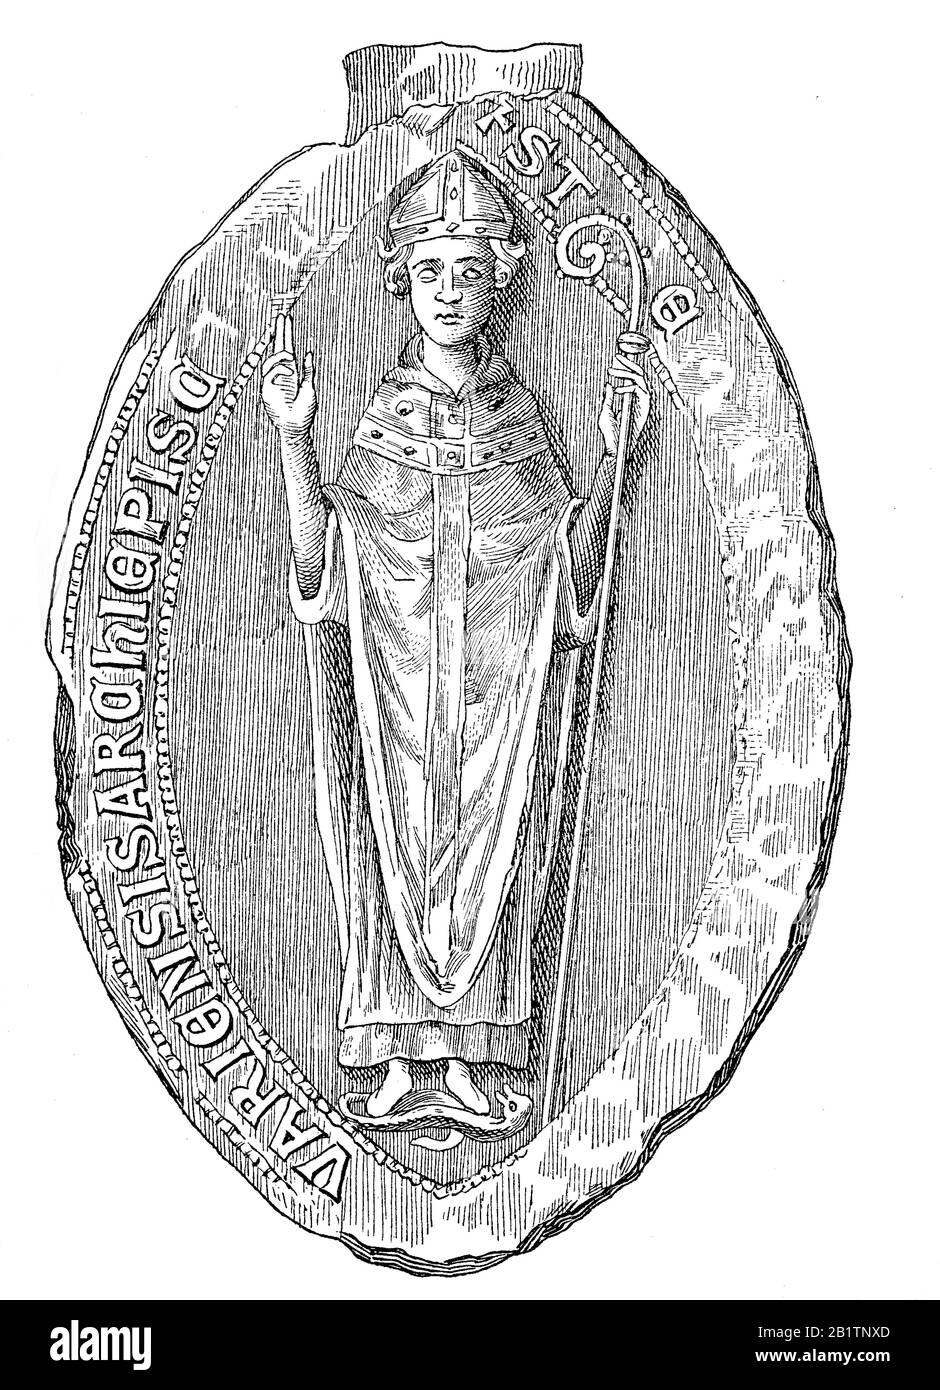 The seal of Stephan Langtons, Archbishop of Canterbury, Stephen Langton, 1150 - 9 July 1228, was an English Cardinal of the Roman Catholic Church and Archbishop of Canterbury between 1207 and his death in 1228  /  Das Siegel von Stephan Langtons, Erzbischof von Canterbury, Stephen Langton, auch Stephan Langton, ein englischer Theologe, Doctor nominatissimus, Kardinal und von 1207 bis 1228 Erzbischof von Canterbury, Historisch, digital improved reproduction of an original from the 19th century / digitale Reproduktion einer Originalvorlage aus dem 19. Jahrhundert Stock Photo